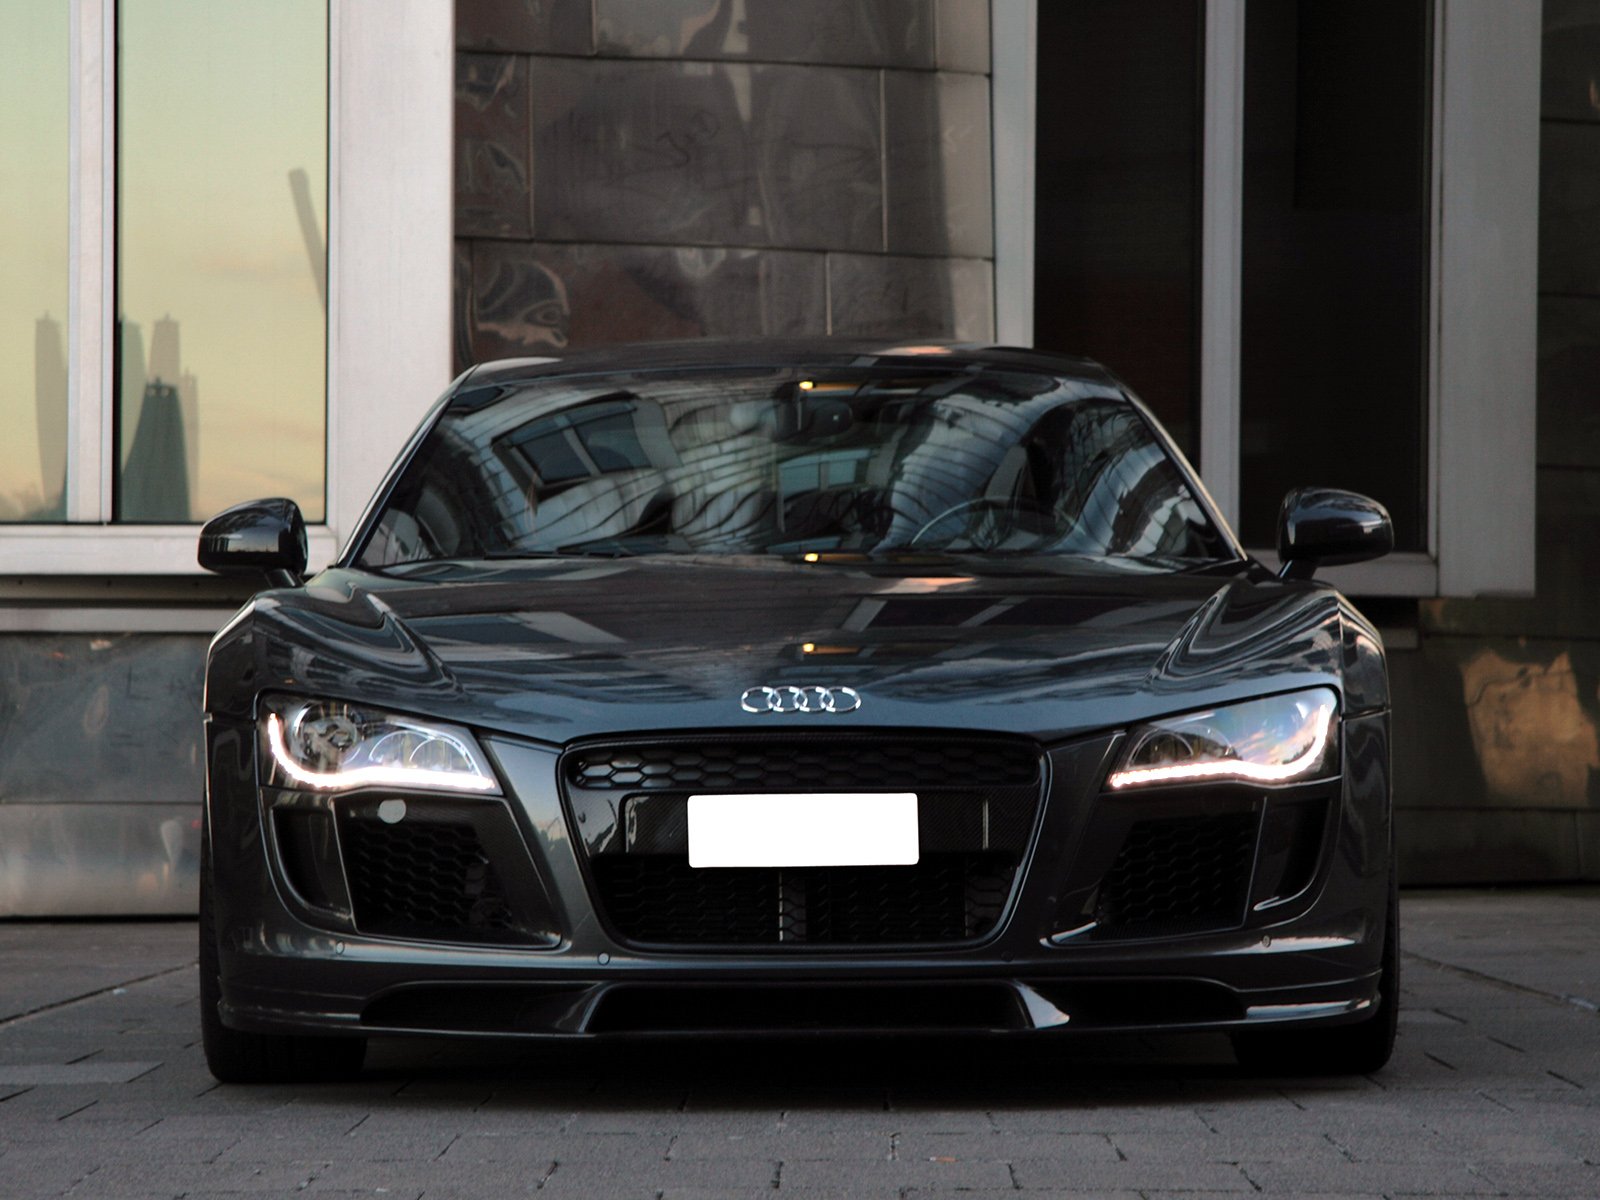 nderson, Germany, Audi r8, V10, Race, Edition, Cars, Modified, 2010 Wallpaper